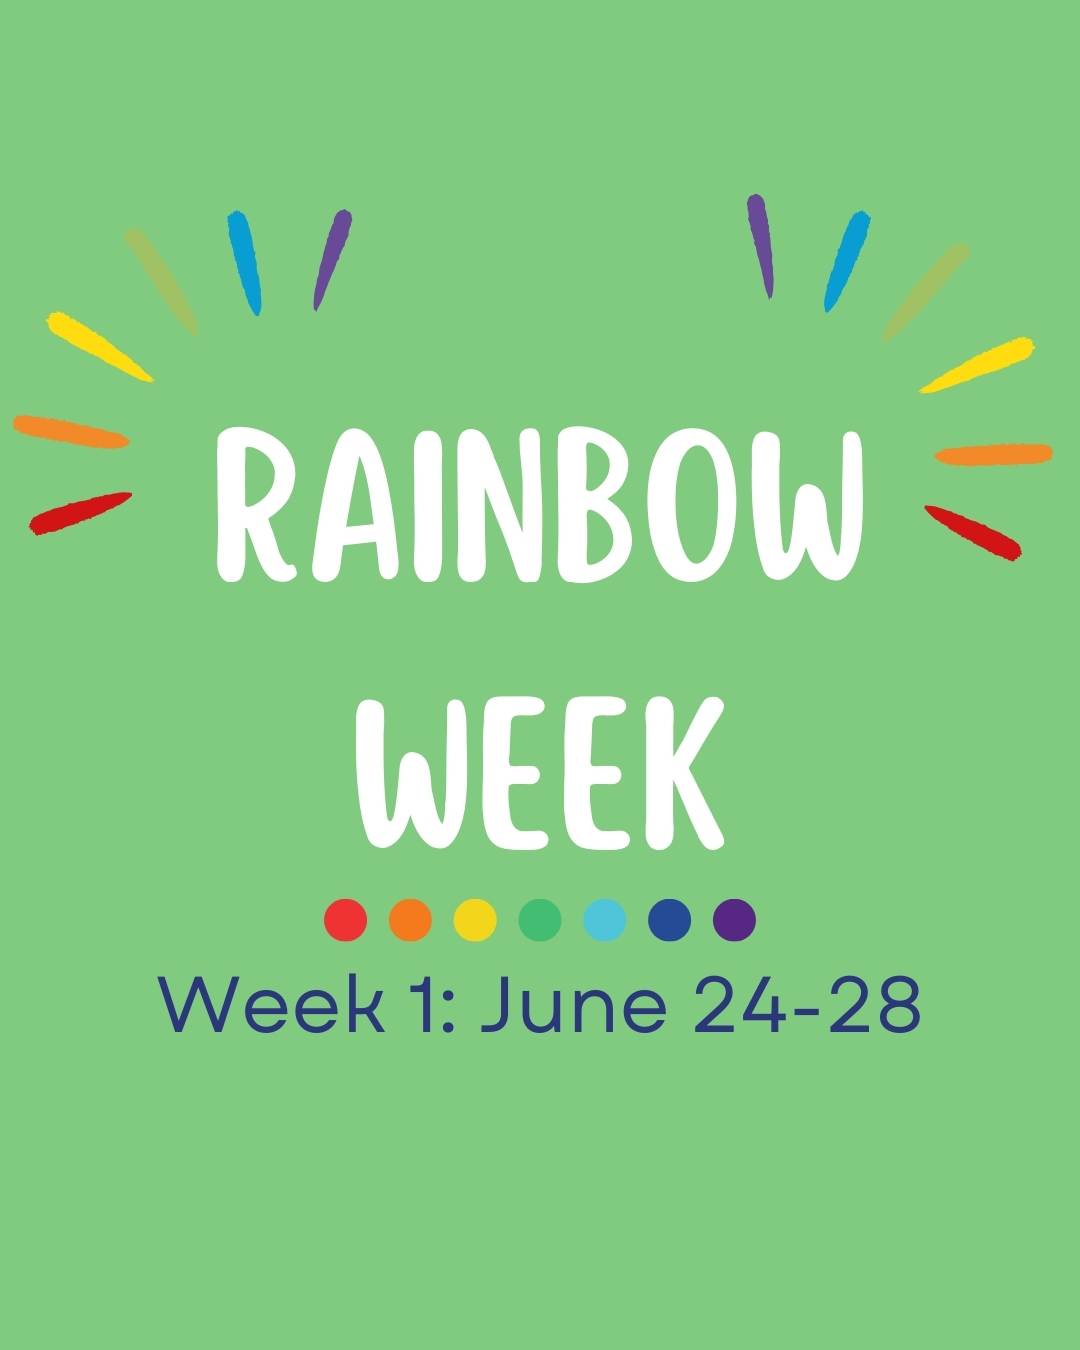 In honor of Pride Month, this week will be called Rainbow Week which includes a variety of showing our Pride to the LGTBQ+ community with lots of love for all! There will be a visit from the ice cream truck and some ice cold popsicles towards the middle of the week.